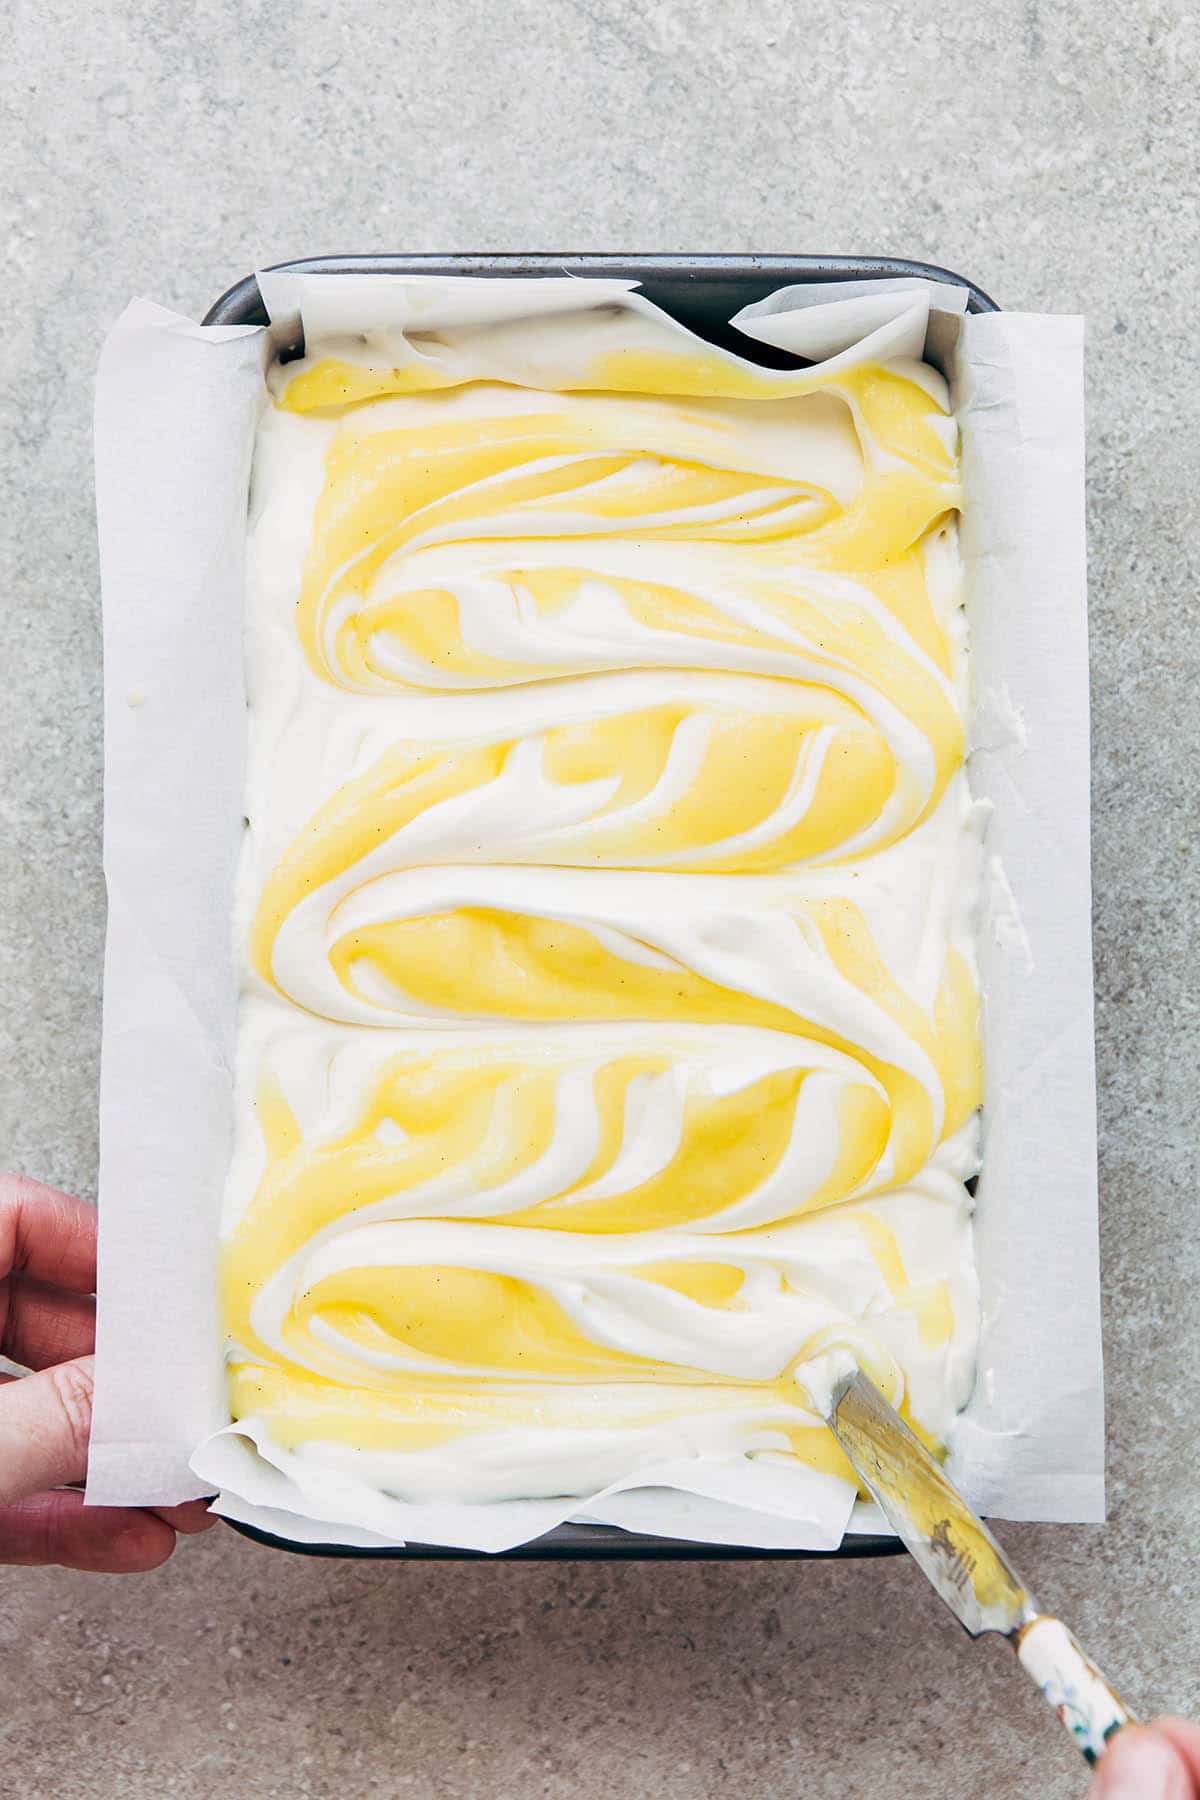 A hand swirling lemon curd through no churn ice cream with a butter knife.